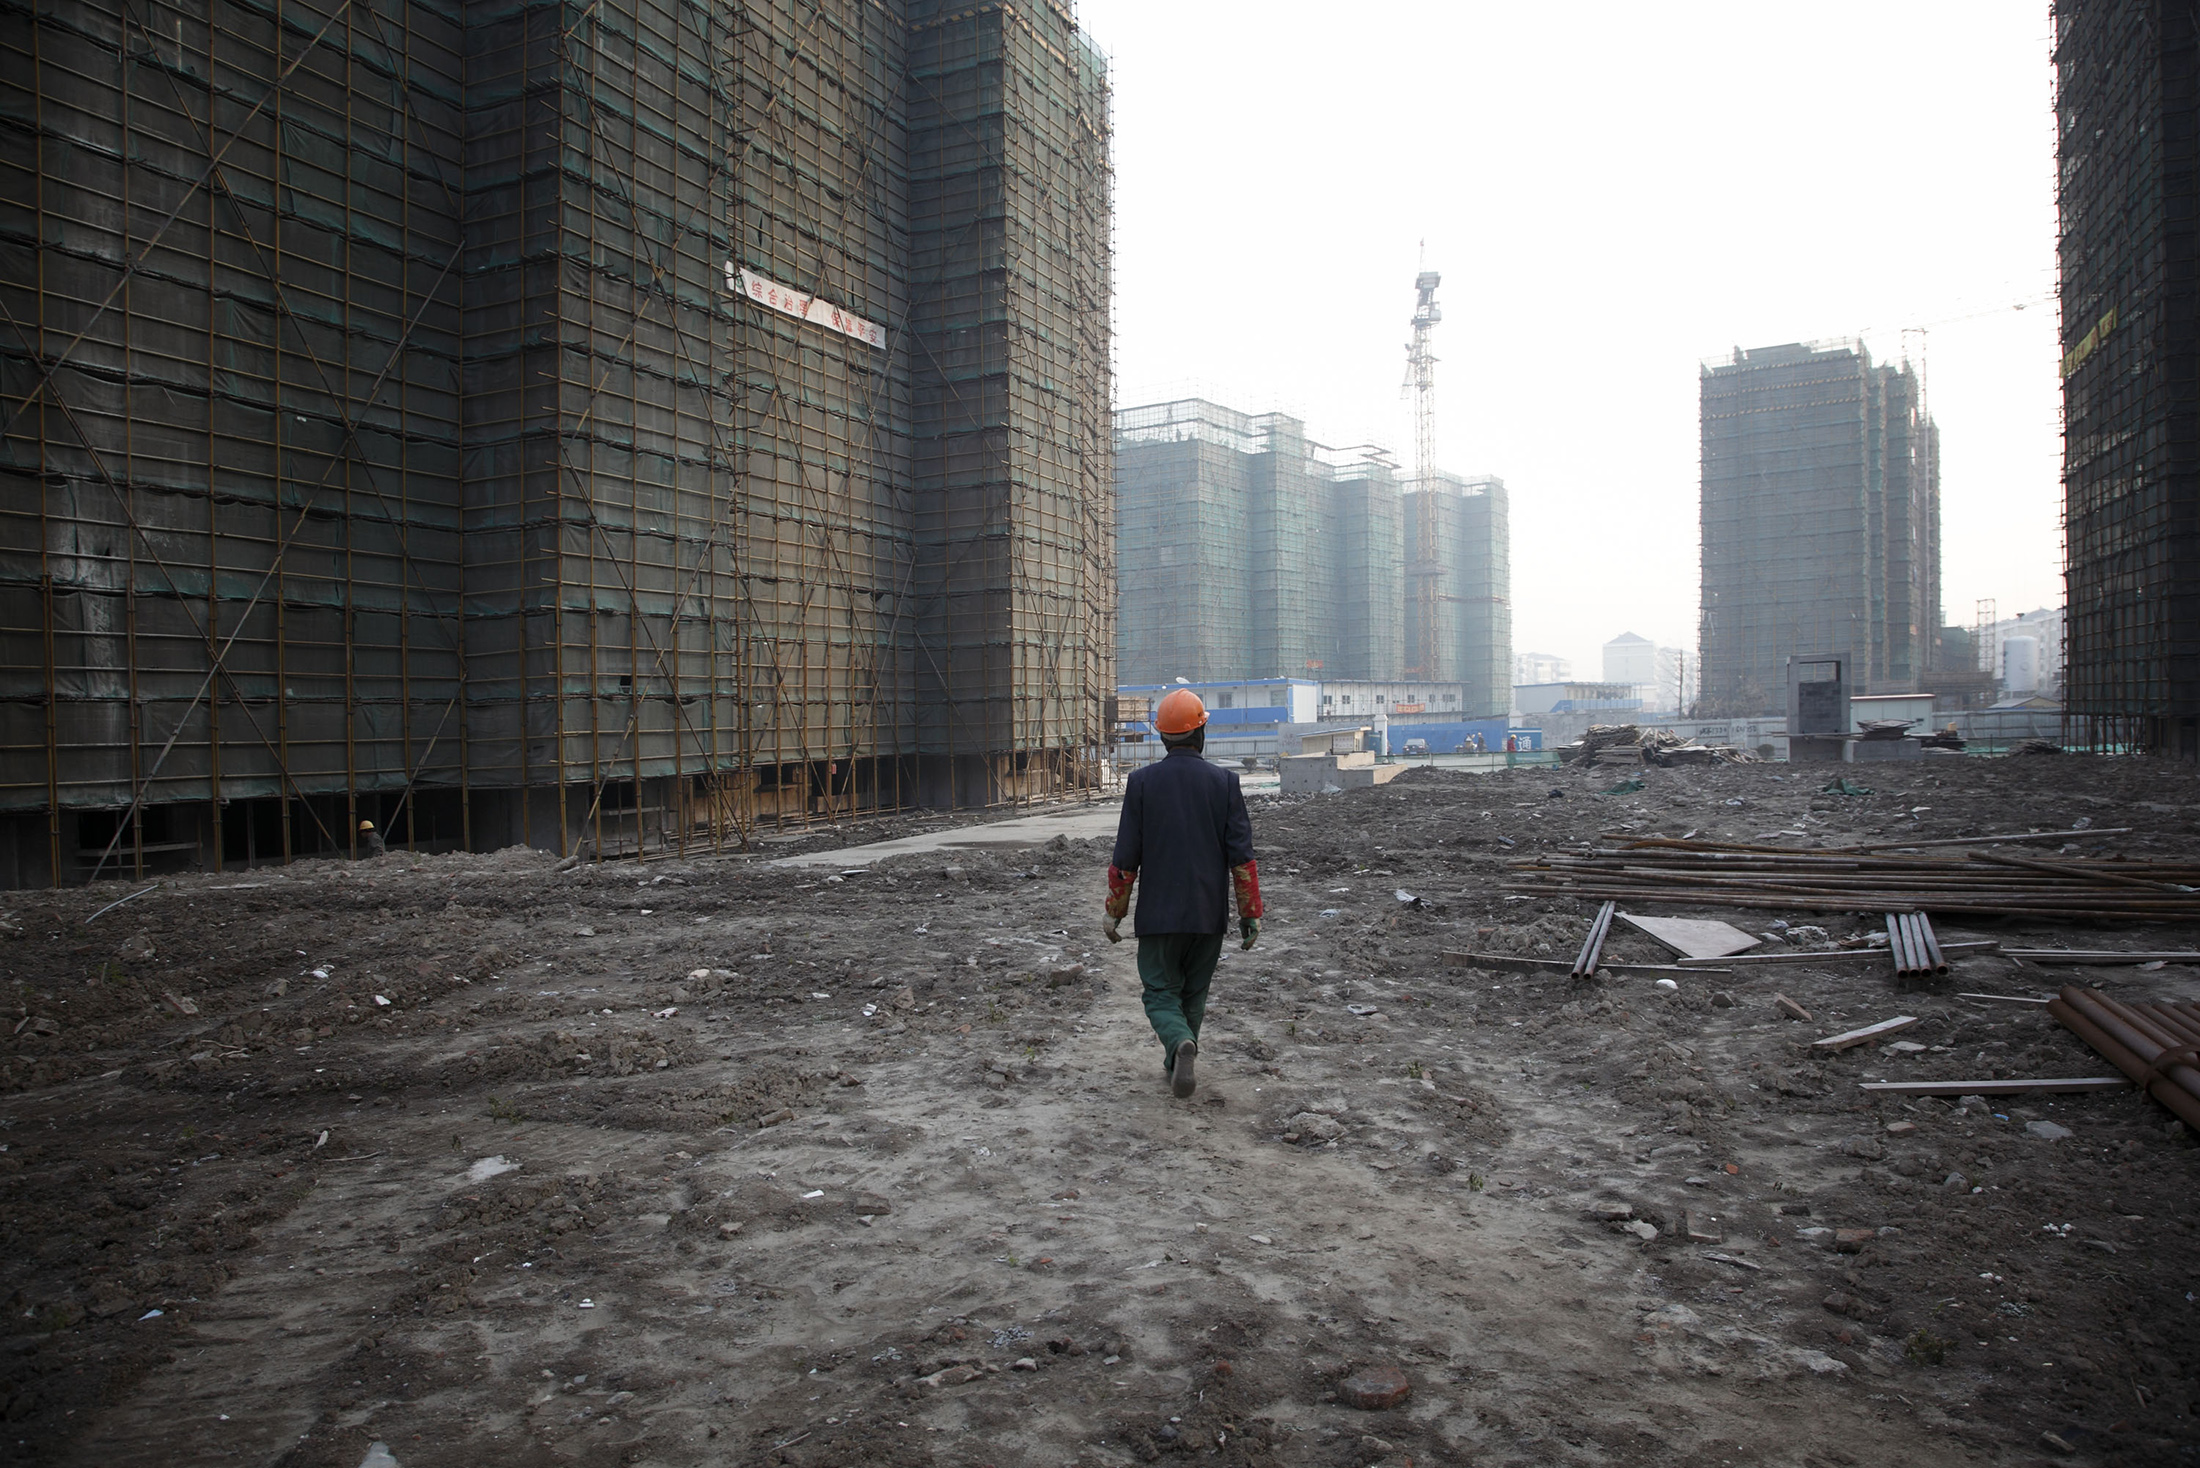 A worker walks through the grounds of an unfinished apartment complex in Shanghai.